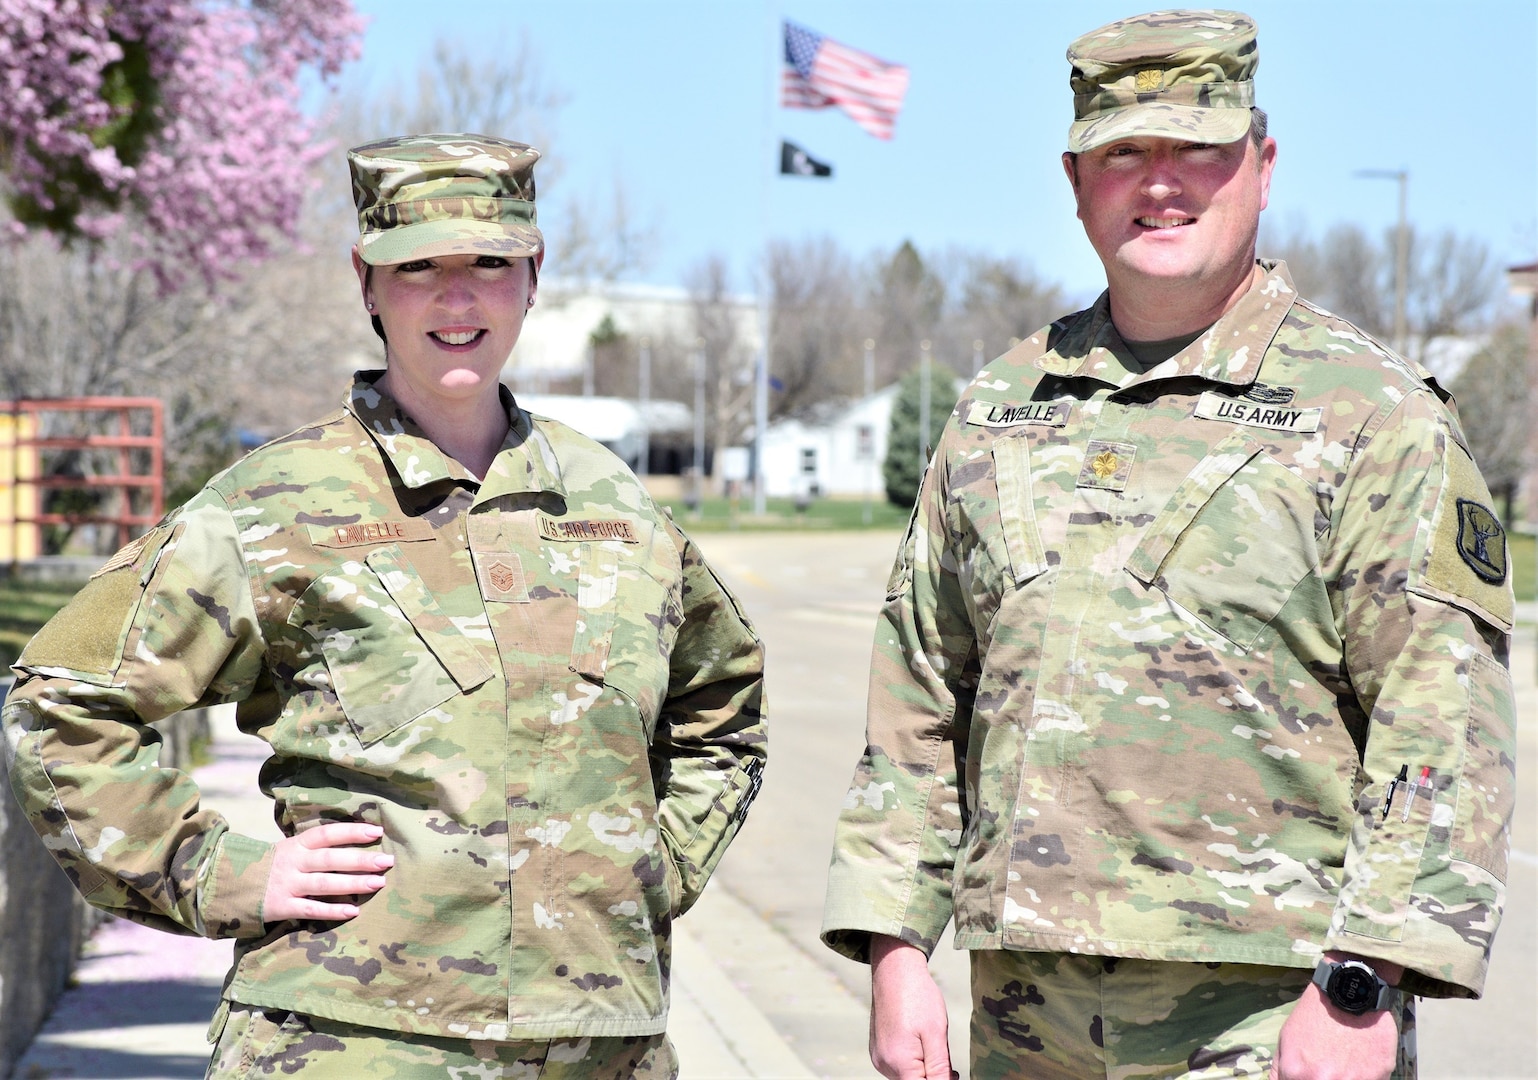 Maj. Christopher Lavelle and his younger sister, Master Sgt. Kerry Lavelle, are known on Gowen Field as “the Lavelles.” They have served on base as full-time technicians for several years and as traditional Guardsmen in the Idaho National Guard for nearly 20 years.